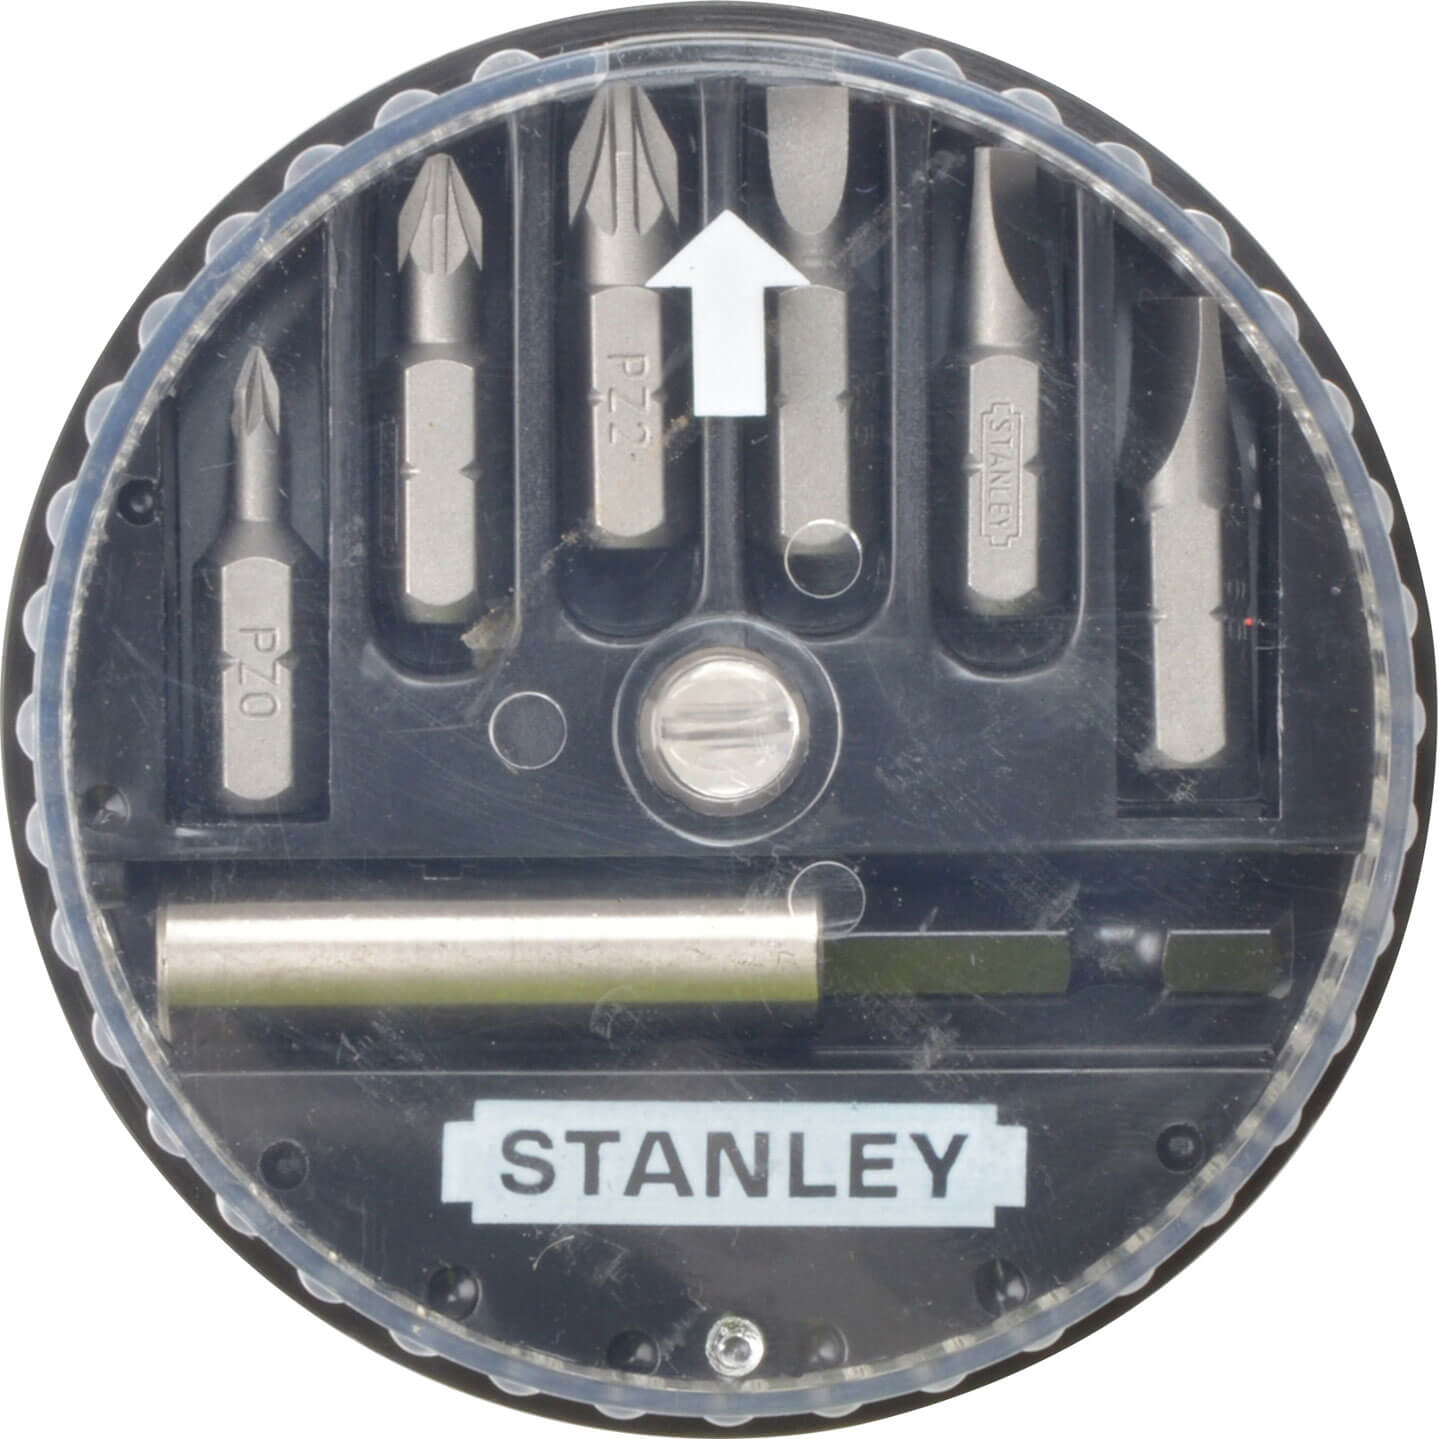 Image of Stanley 7 Piece Slotted and Pozi Insert Screwdriver Bit Set